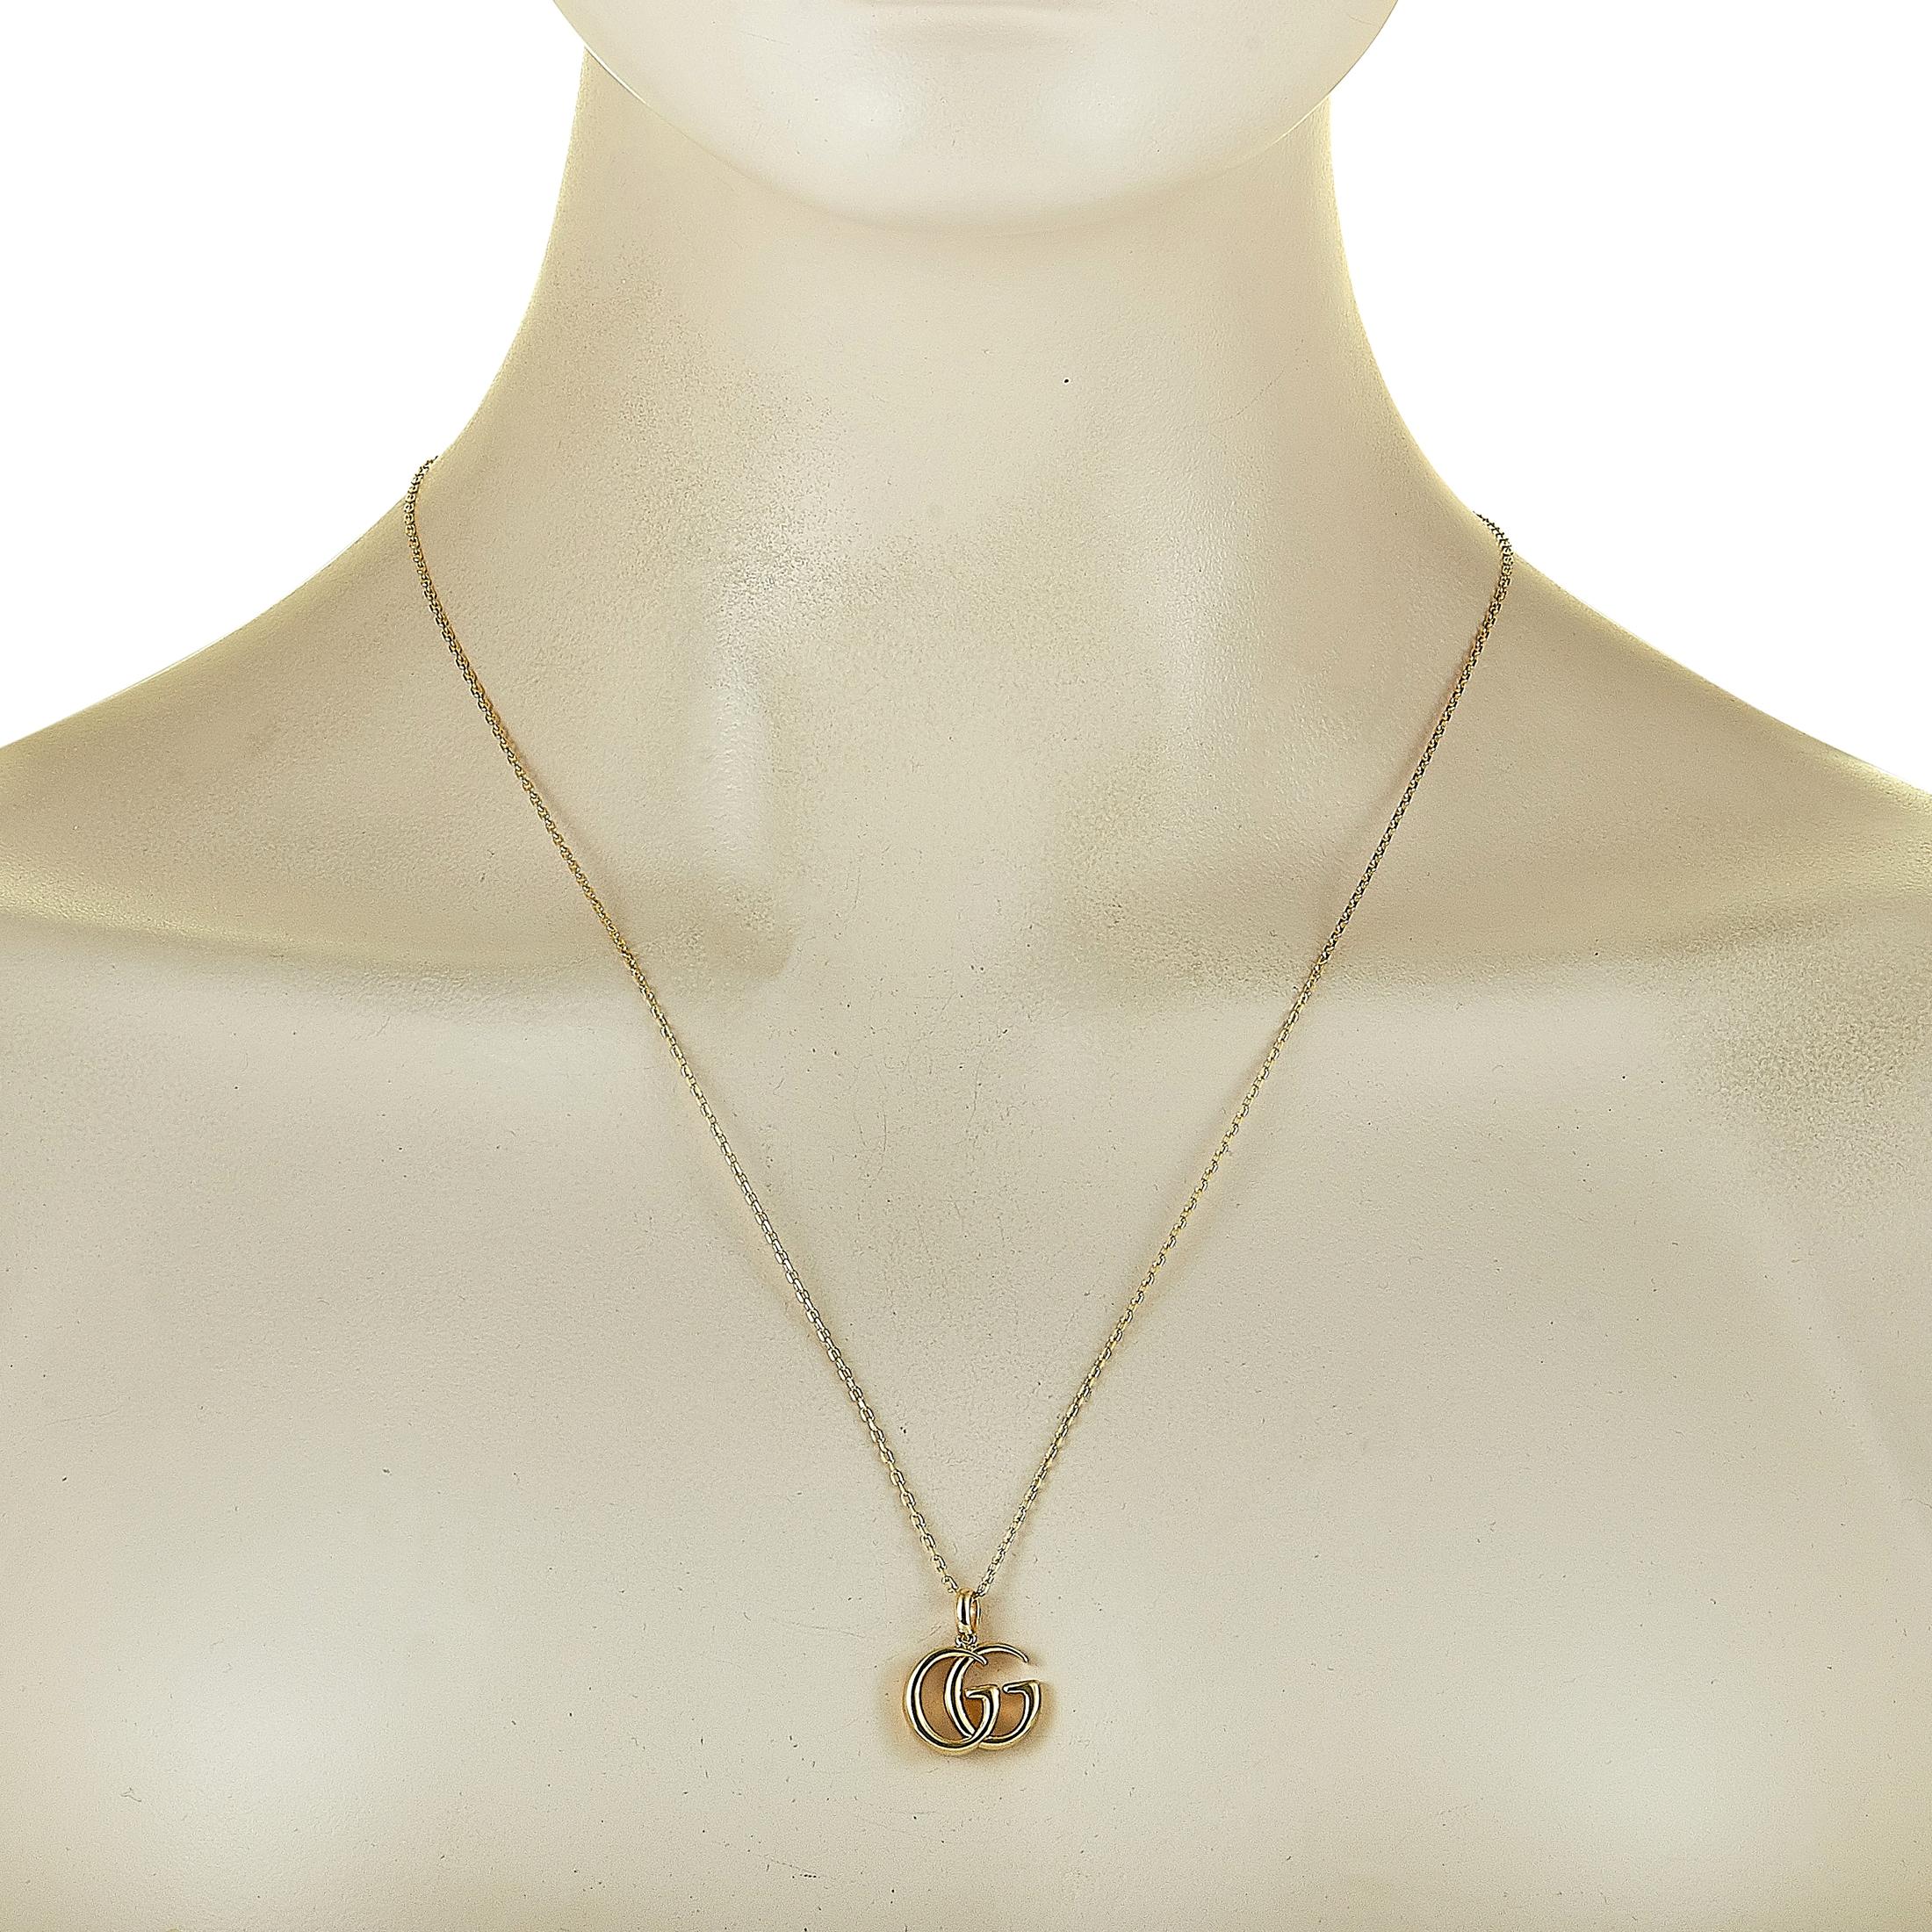 The Gucci “GG Running” necklace is made of 18K yellow gold and weighs 9.8 grams. The necklace boasts a 22” chain and a pendant that measures 0.75” in length and 0.62” in width.
 
 This jewelry piece is offered in brand new condition and includes the